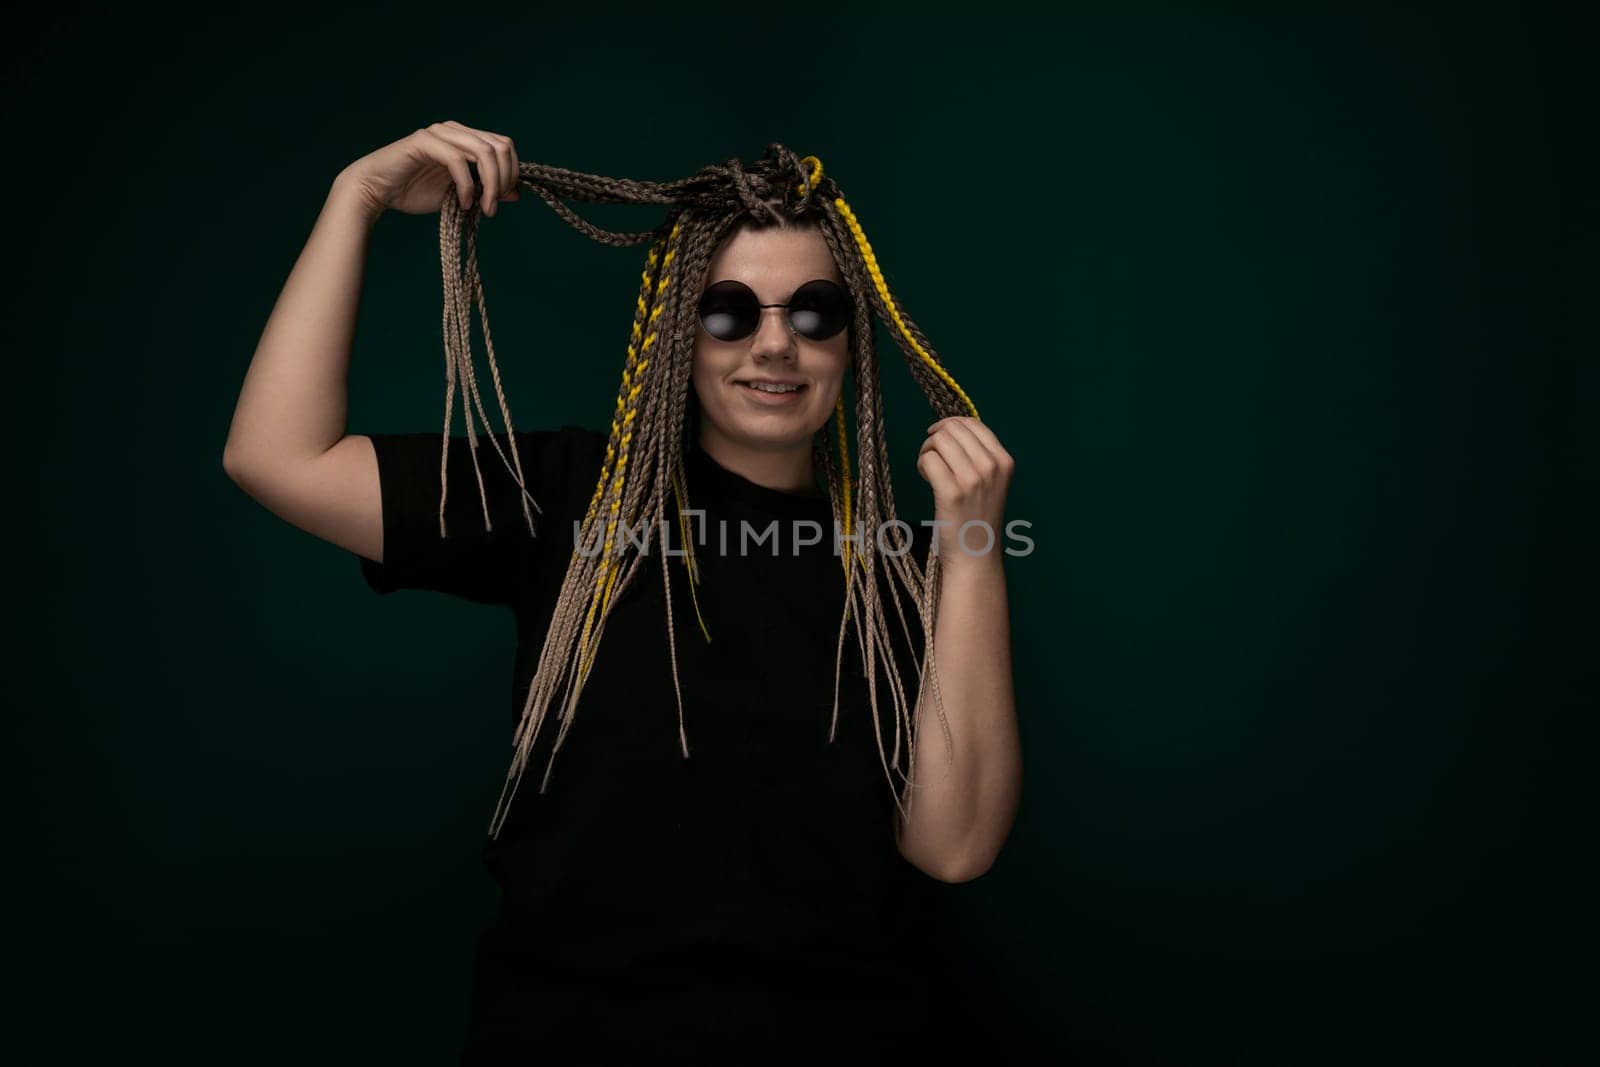 A woman with long dreadlocks on her head is striking a pose while someone takes her photo. She is looking directly at the camera with a confident expression, showcasing her unique hairstyle.